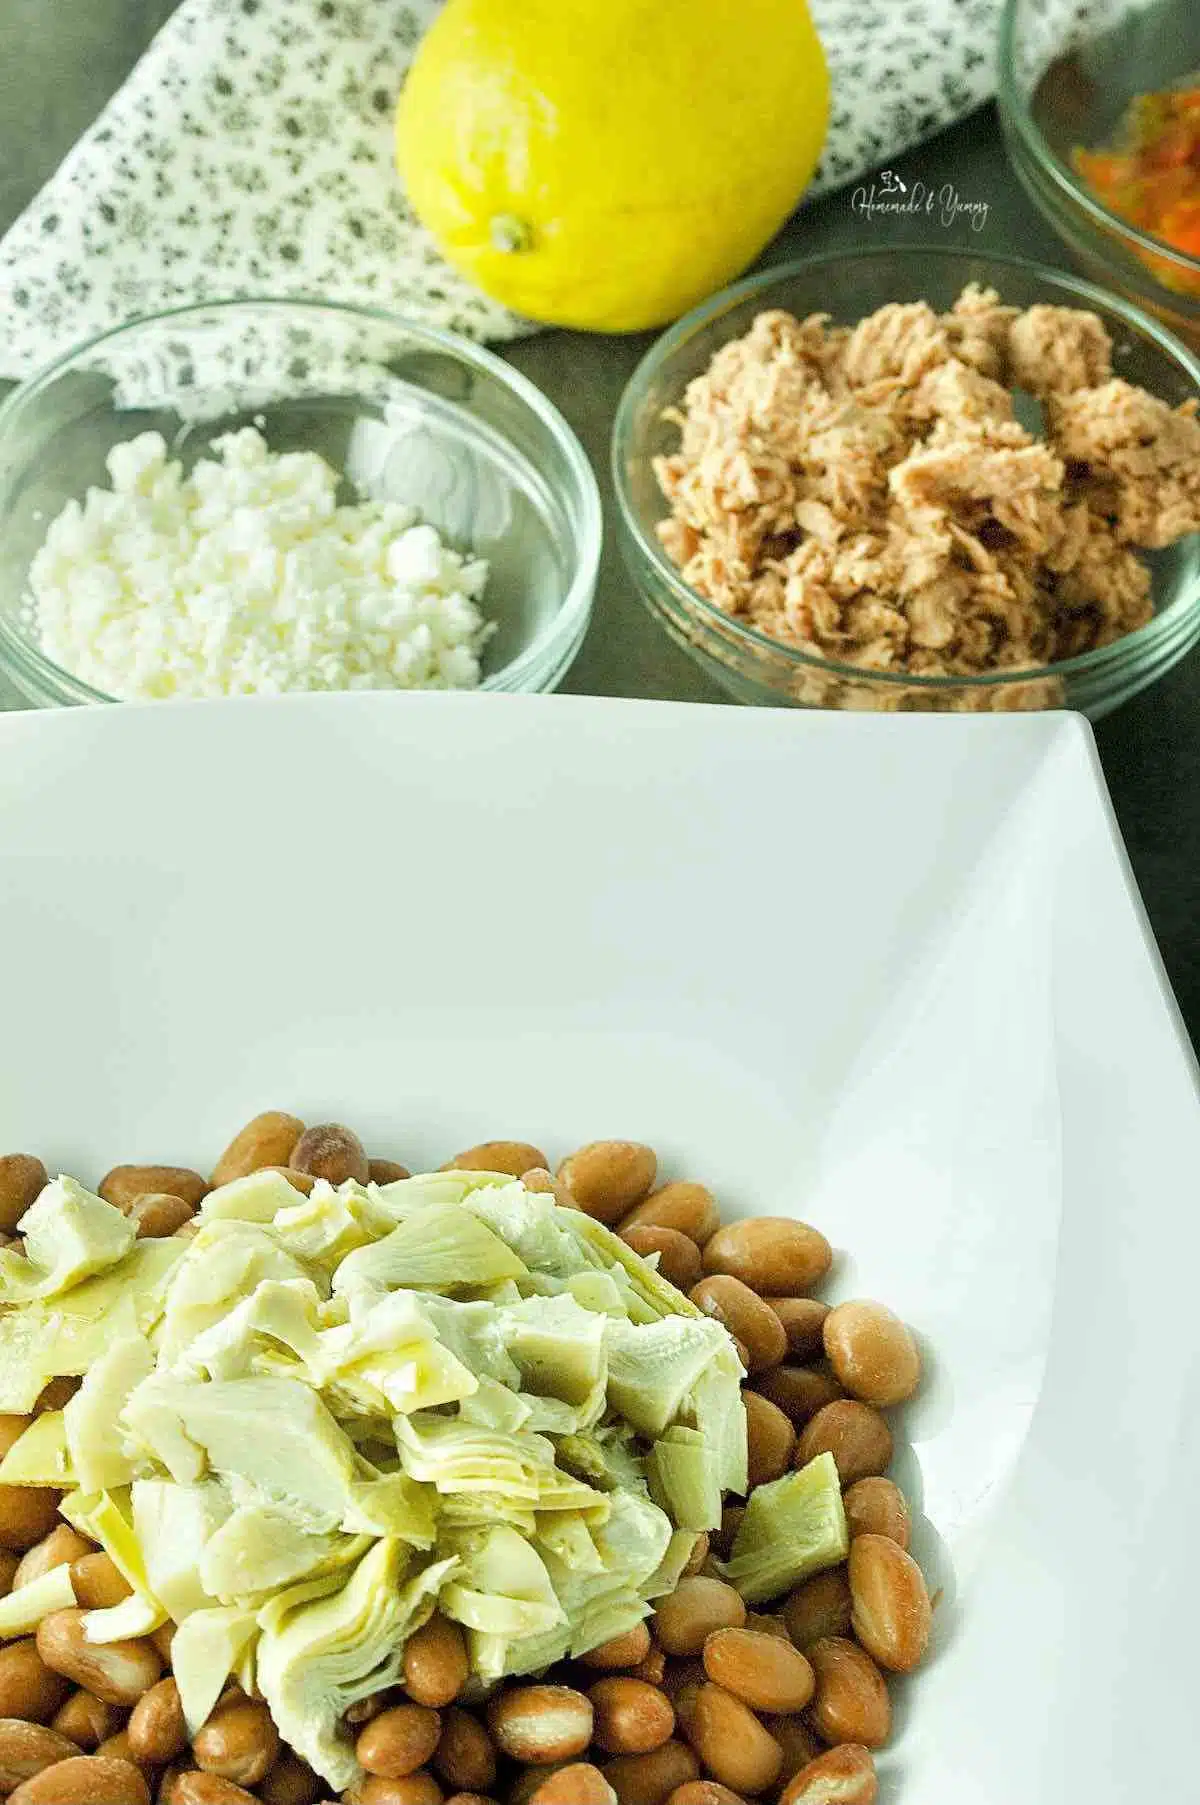 Ingredients to make a Mediterranean-style tuna and avocado salad.